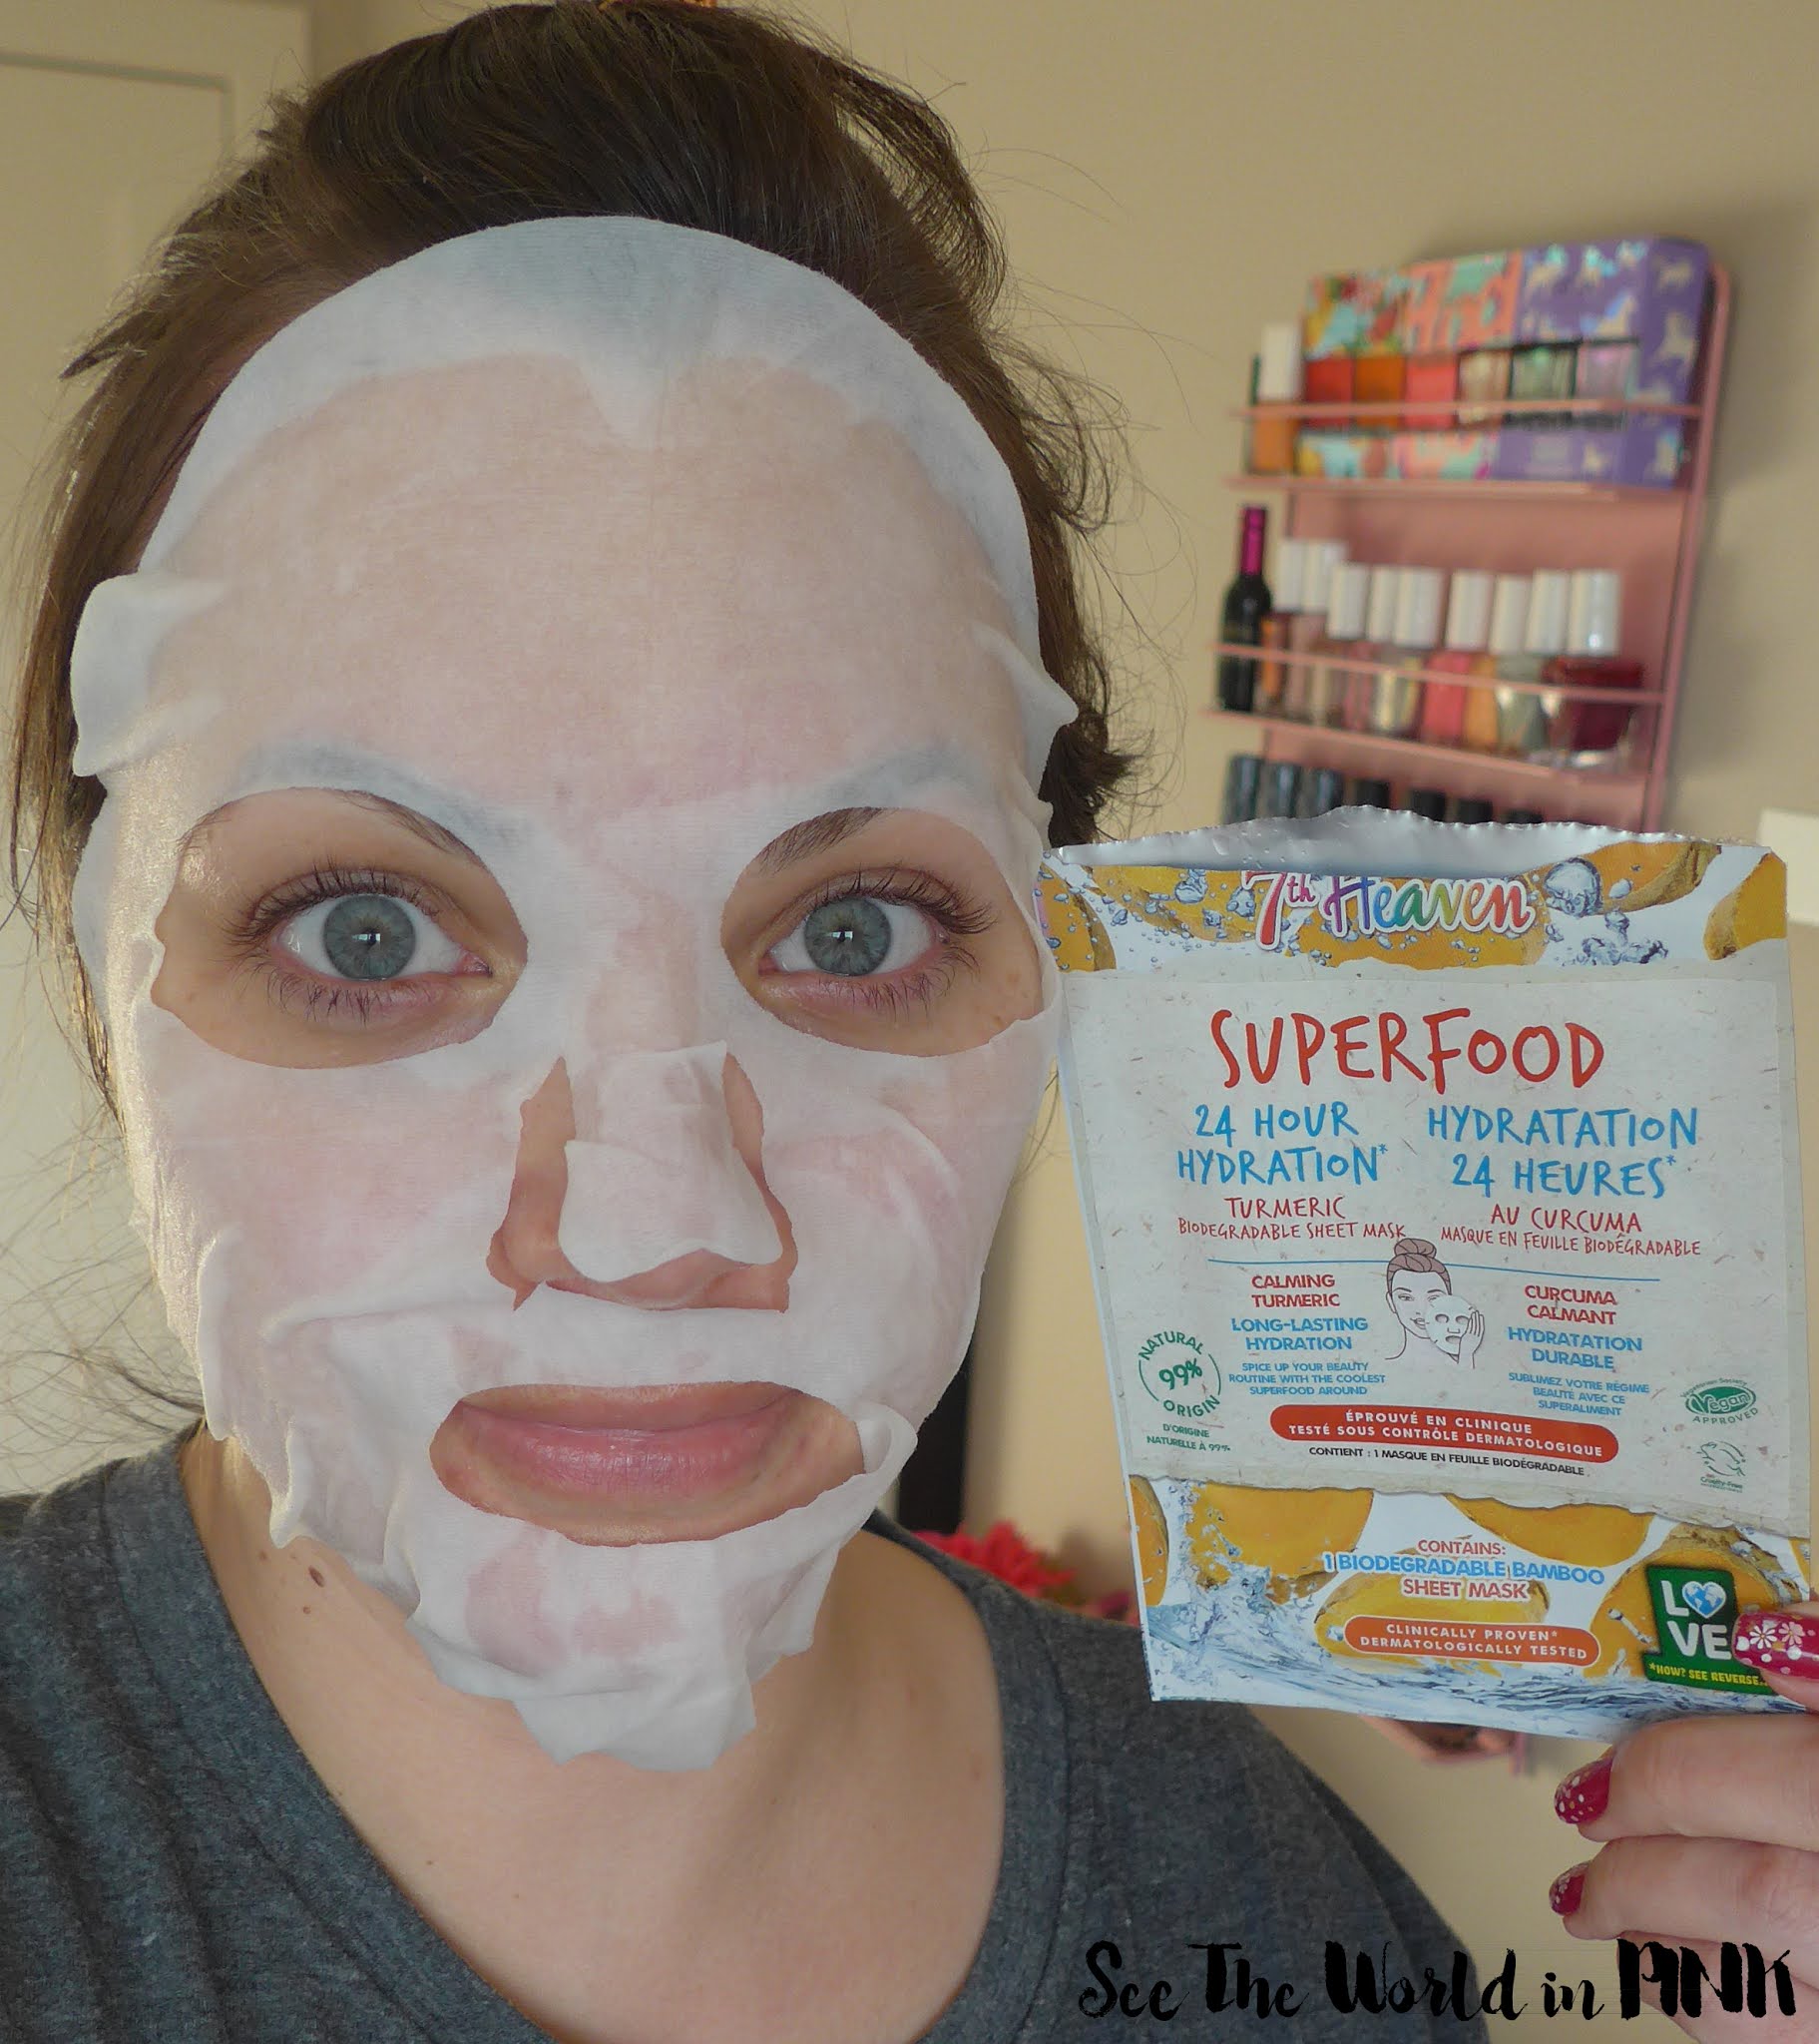 7th Heaven Superfood Avocado, Rice Protein, and Turmeric Bamboo Biodegradable Sheet Masks